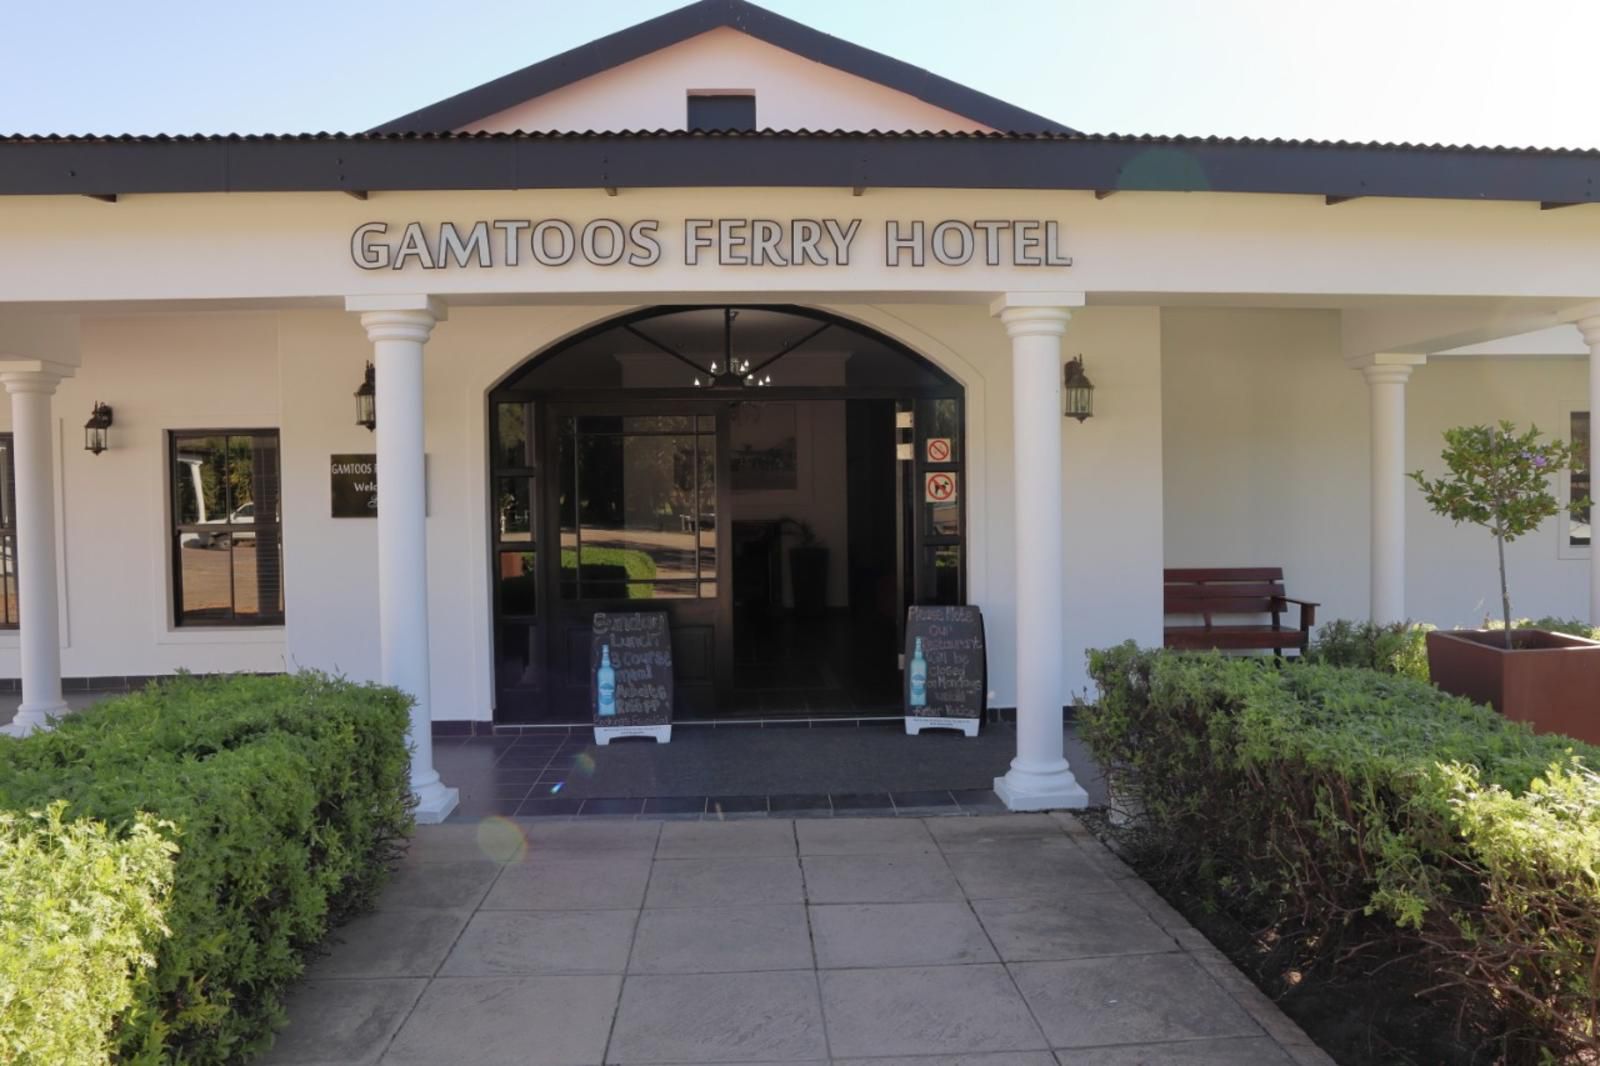 The Gamtoos Ferry Hotel Loerie Eastern Cape South Africa House, Building, Architecture